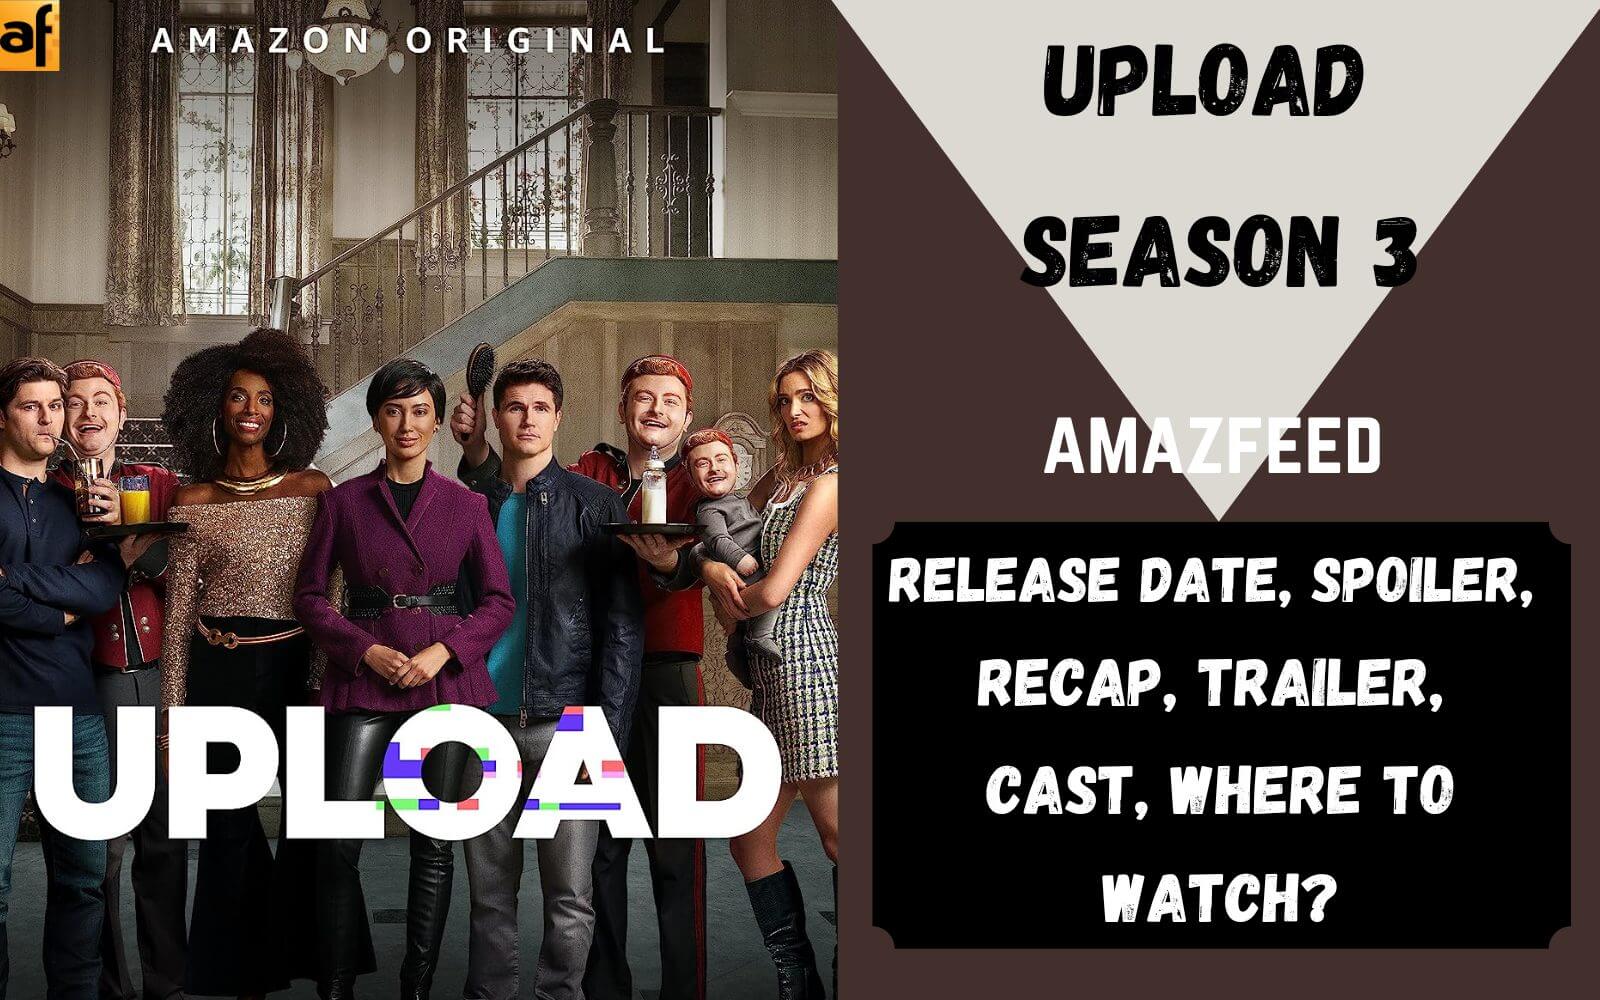 Upload season 3 potential release date, cast, plot and more